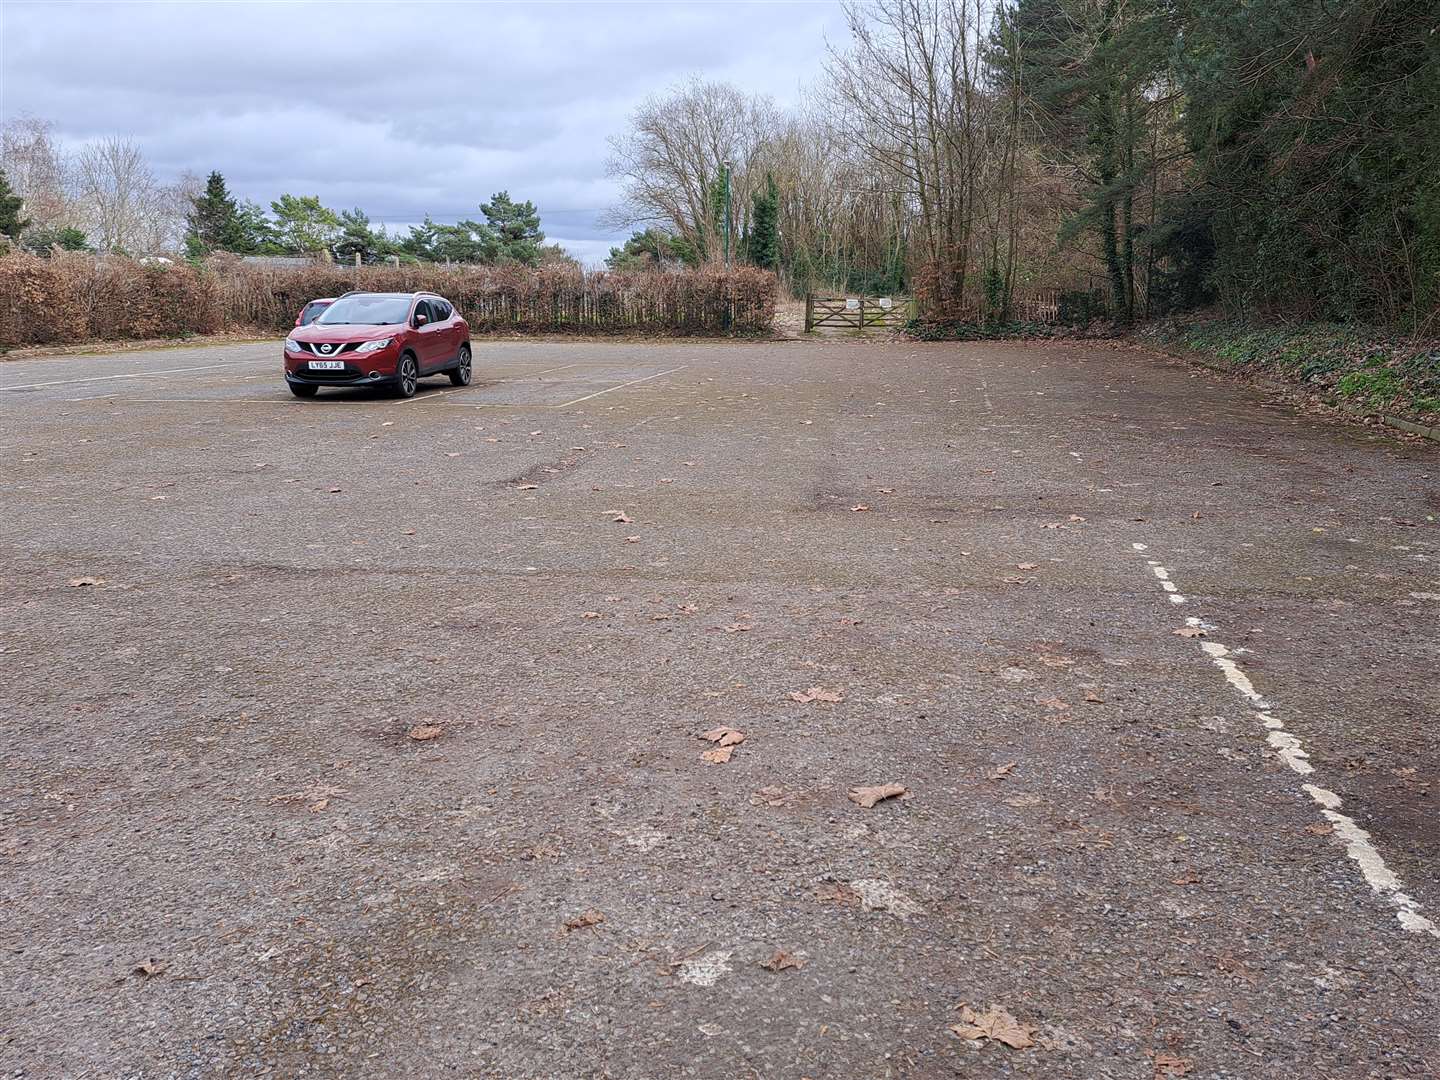 The large public car park is rarely used